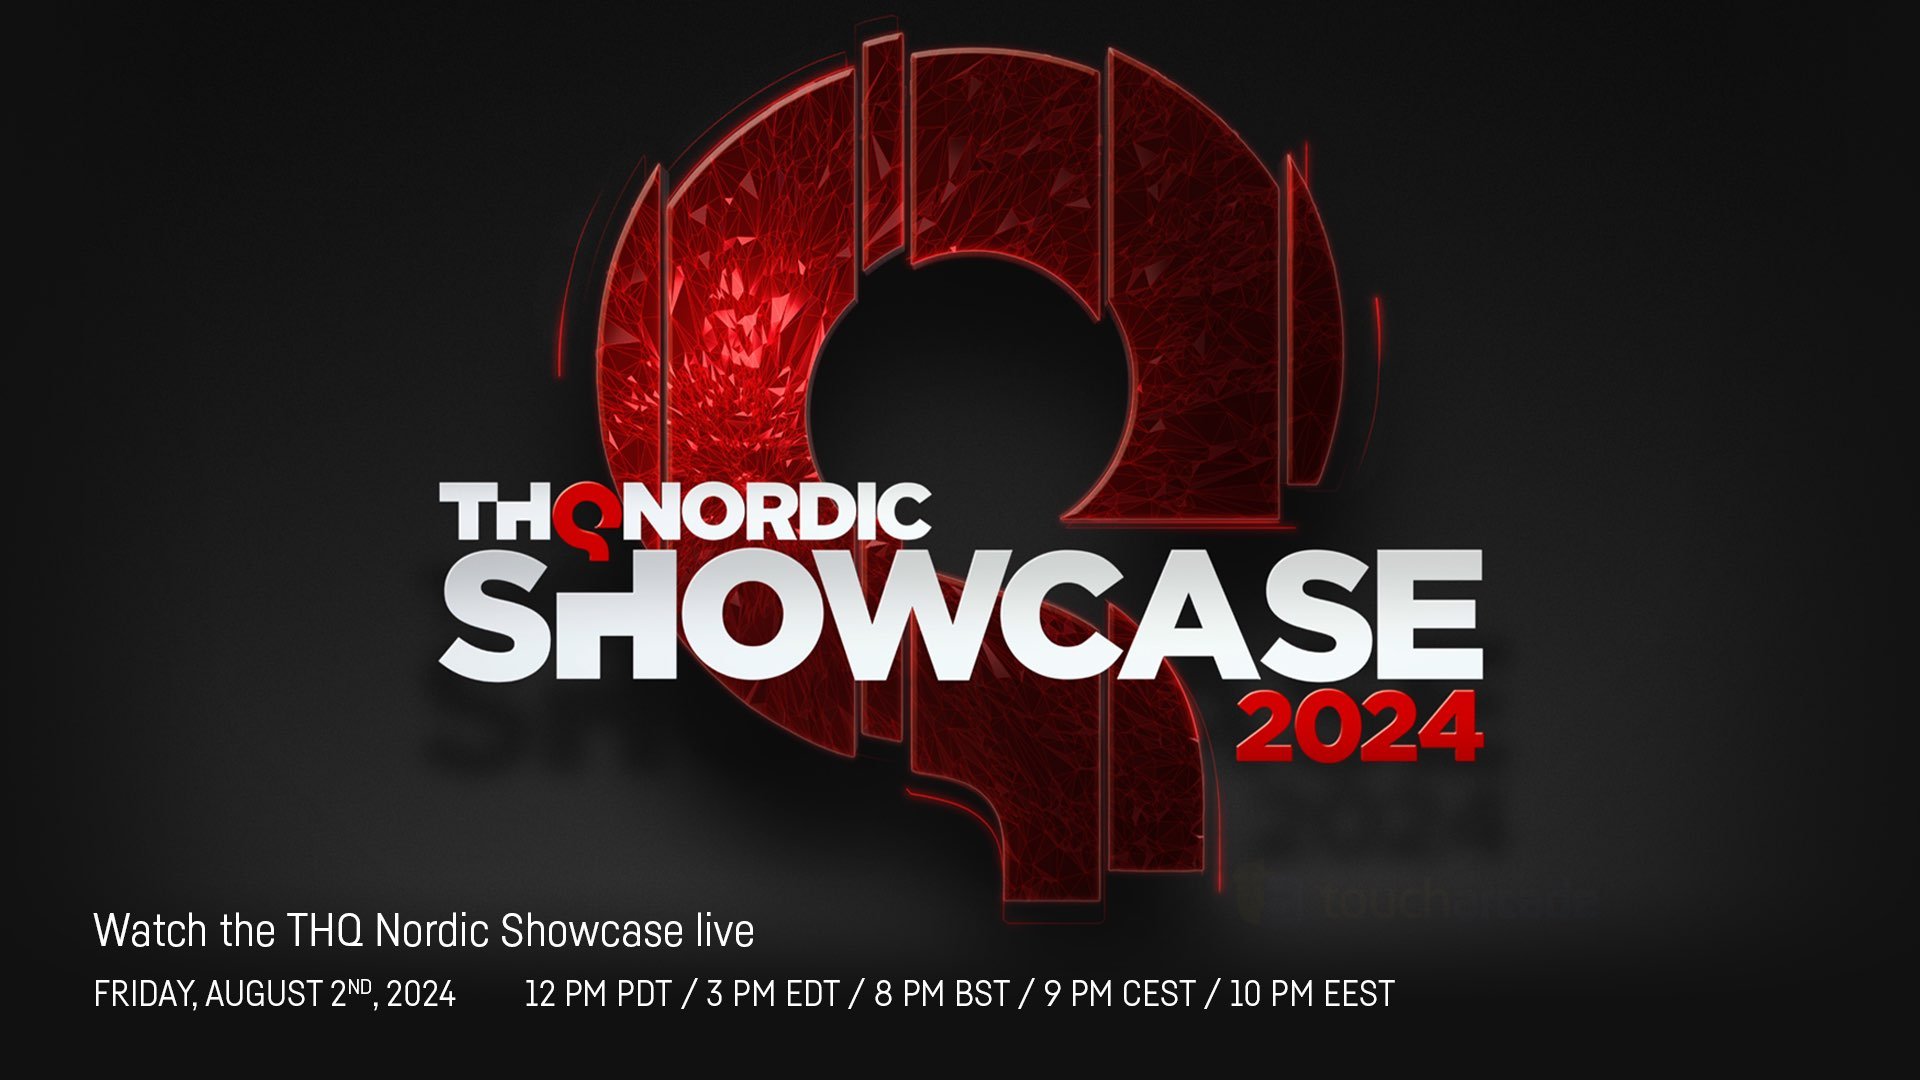 THQ Nordic Digital Showcase 2024 Announced for August 2nd, HandyGames Pre-Show Confirmed